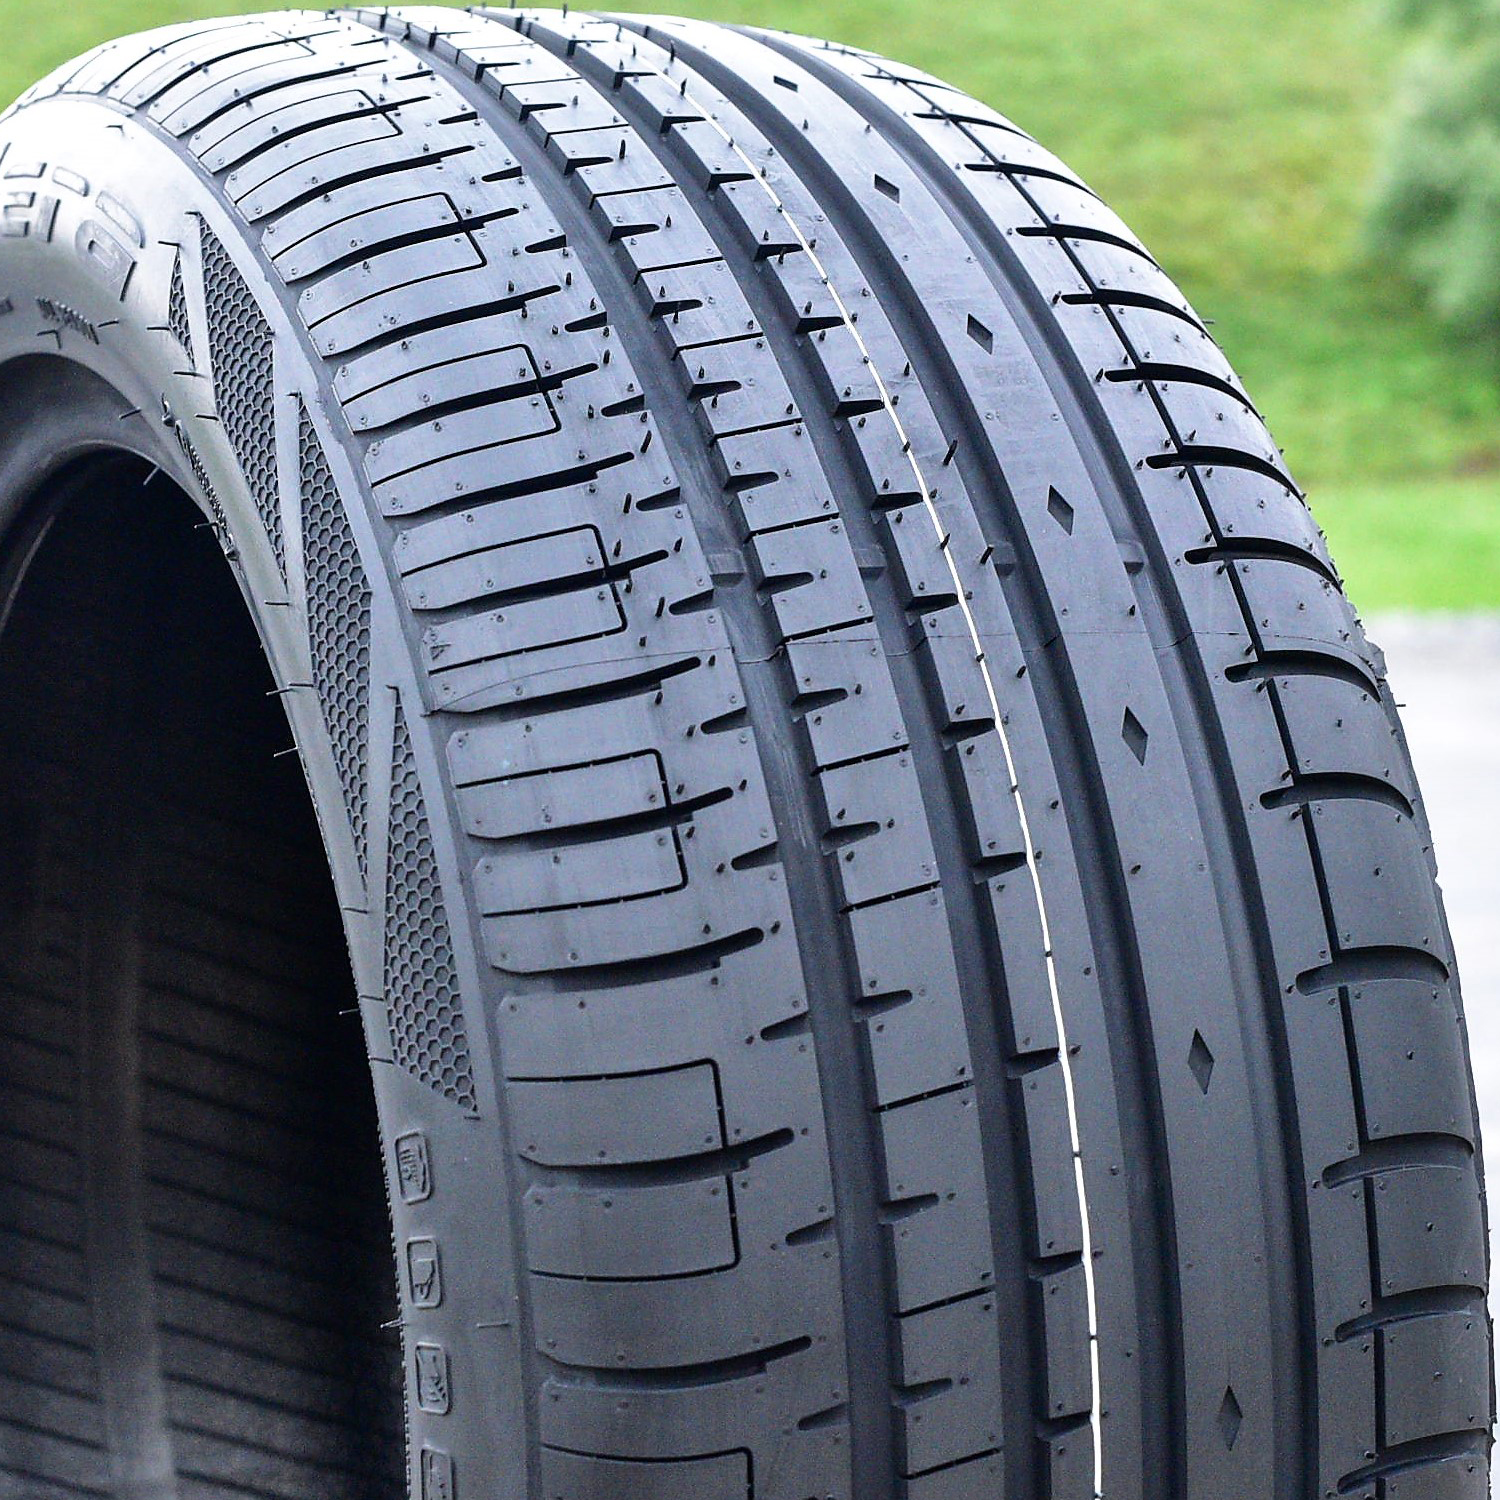 Accelera Phi-R 255/35R20 ZR 97Y XL A/S High Performance Tire - image 4 of 14